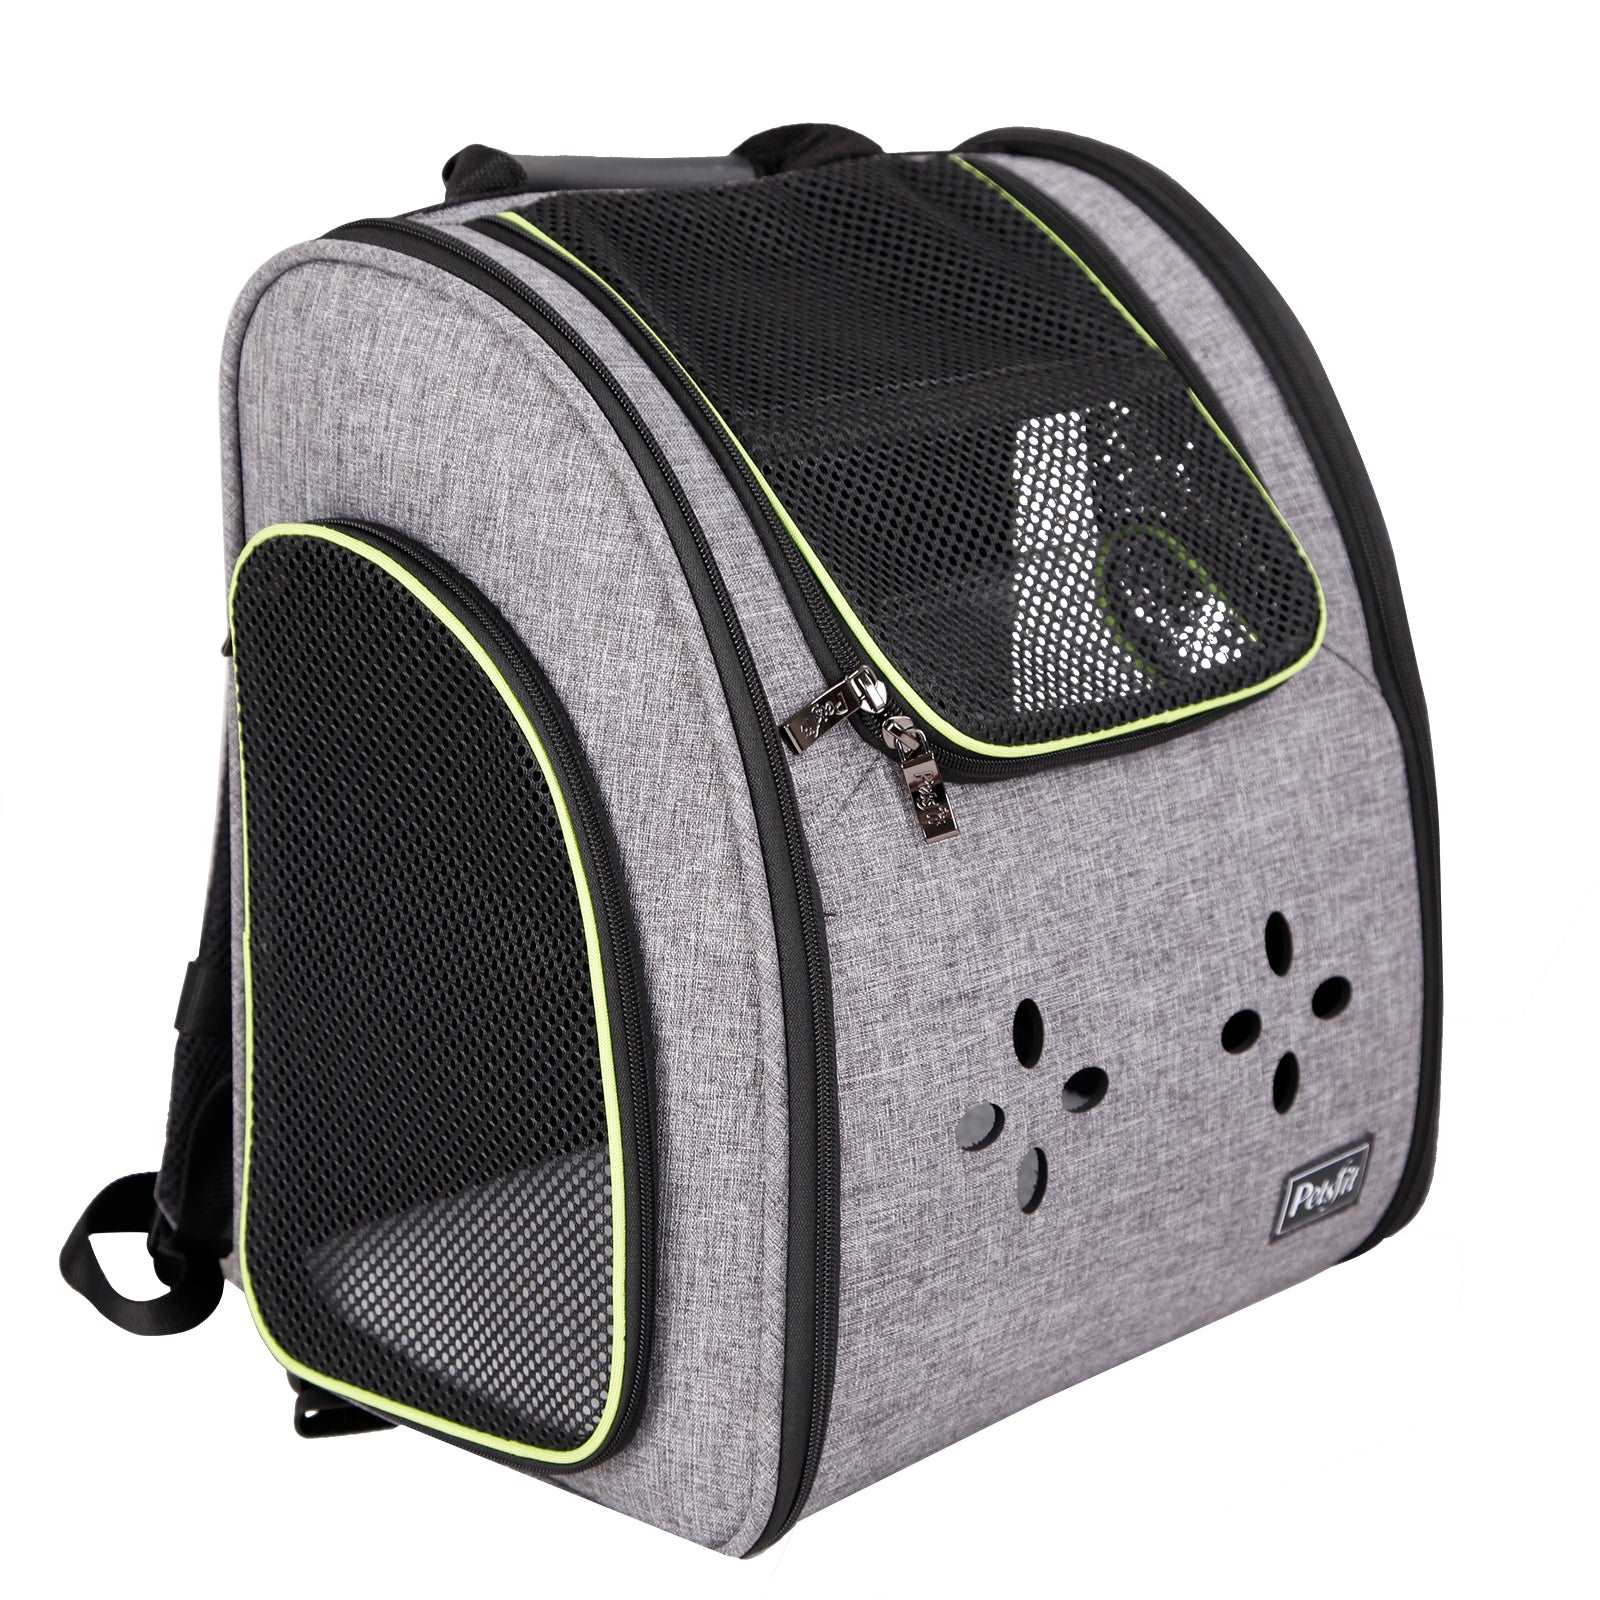 Petsfit-Cat-and-Dog-Backpack-Carrier-Soft-Side-with-Good-Ventilation-04